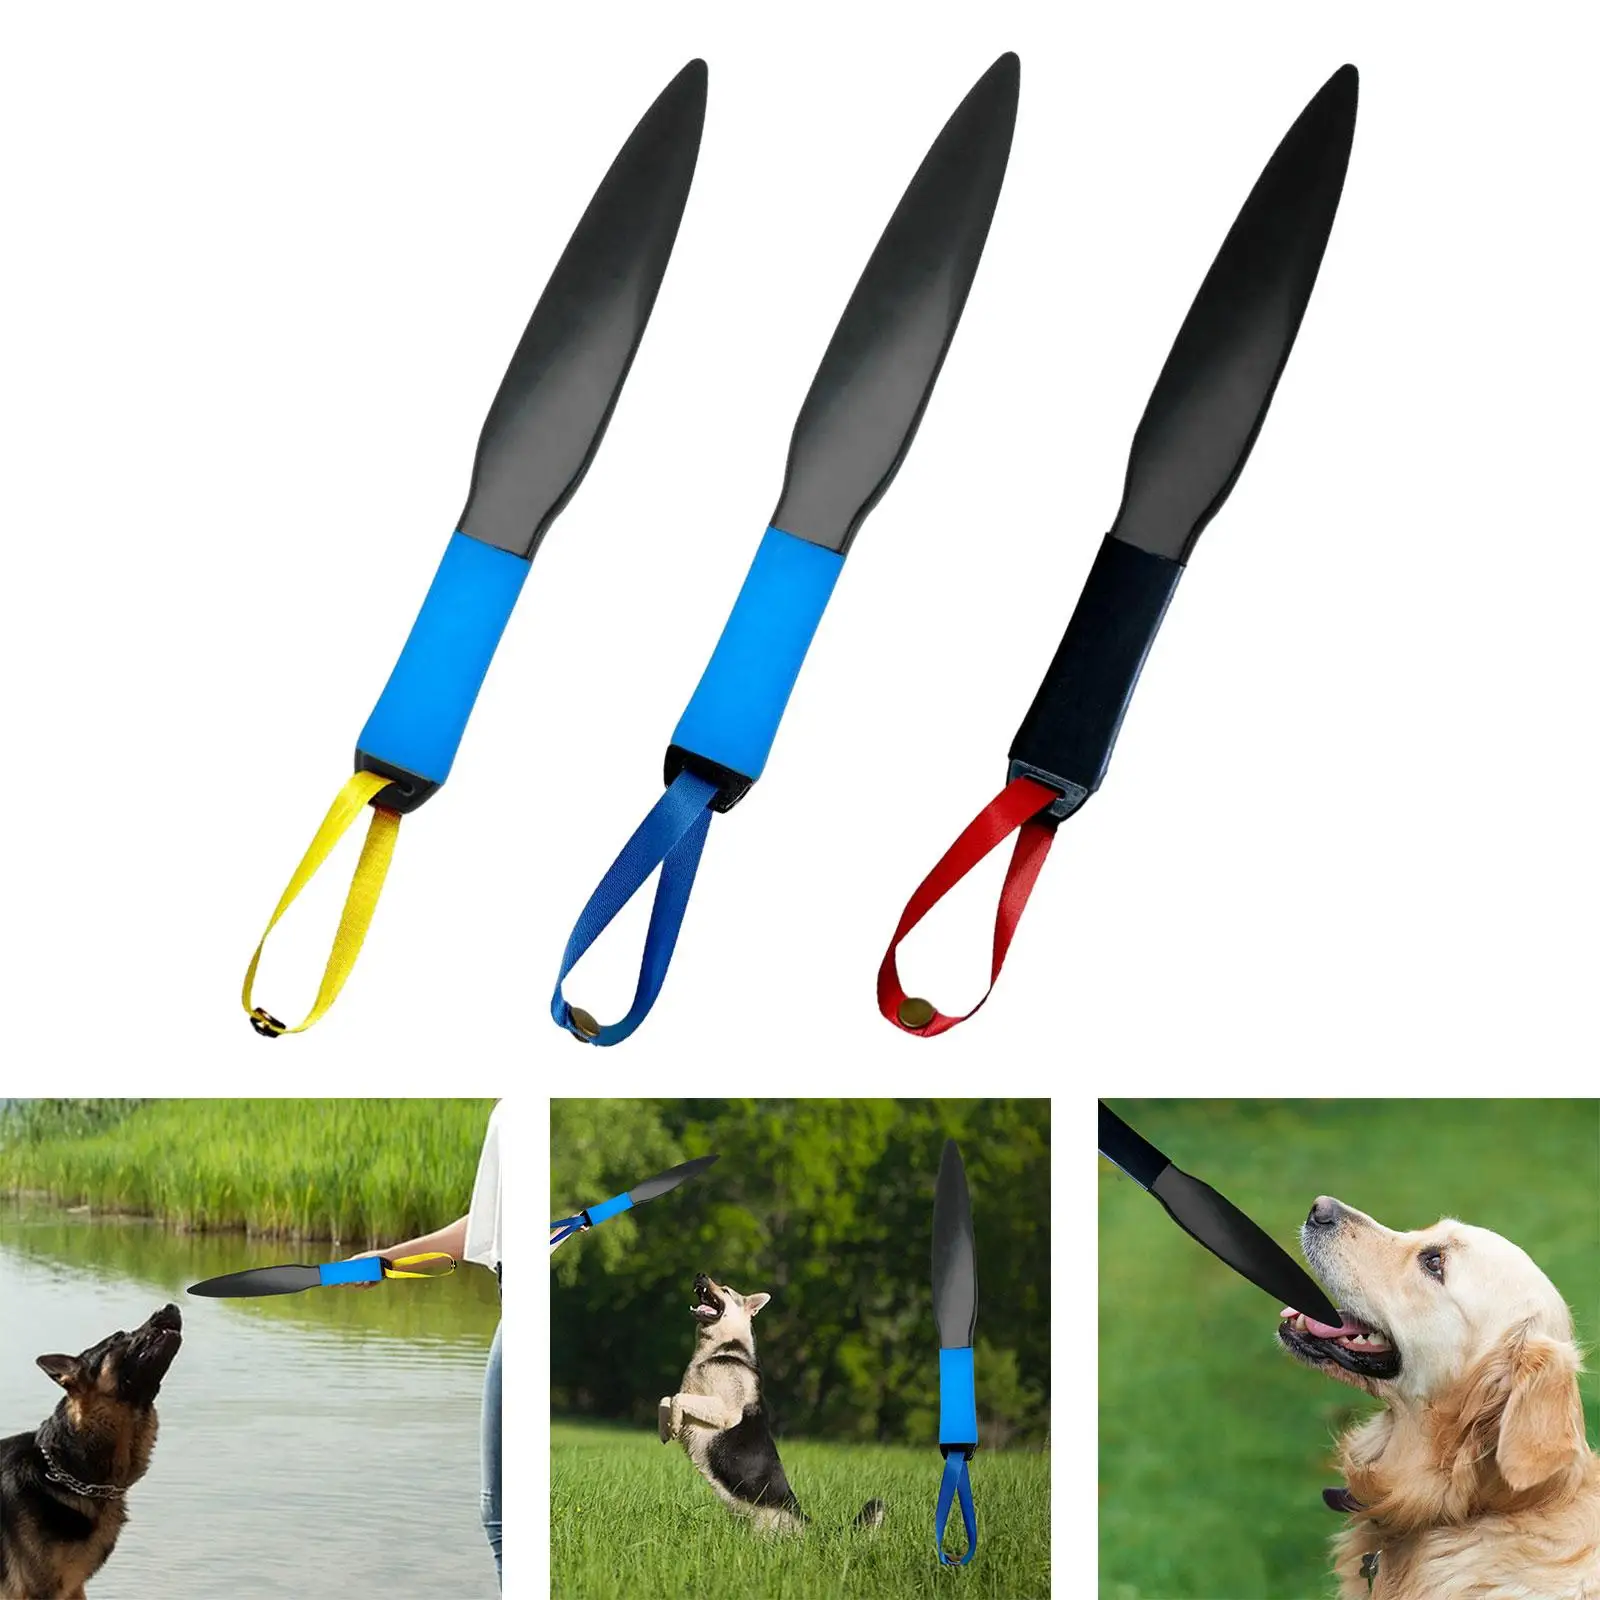 Pet Crowbar Professional Protective Nylon Interactive Chewing Toy Pet Mouth Bite Training Stick for Training Strong Dogs